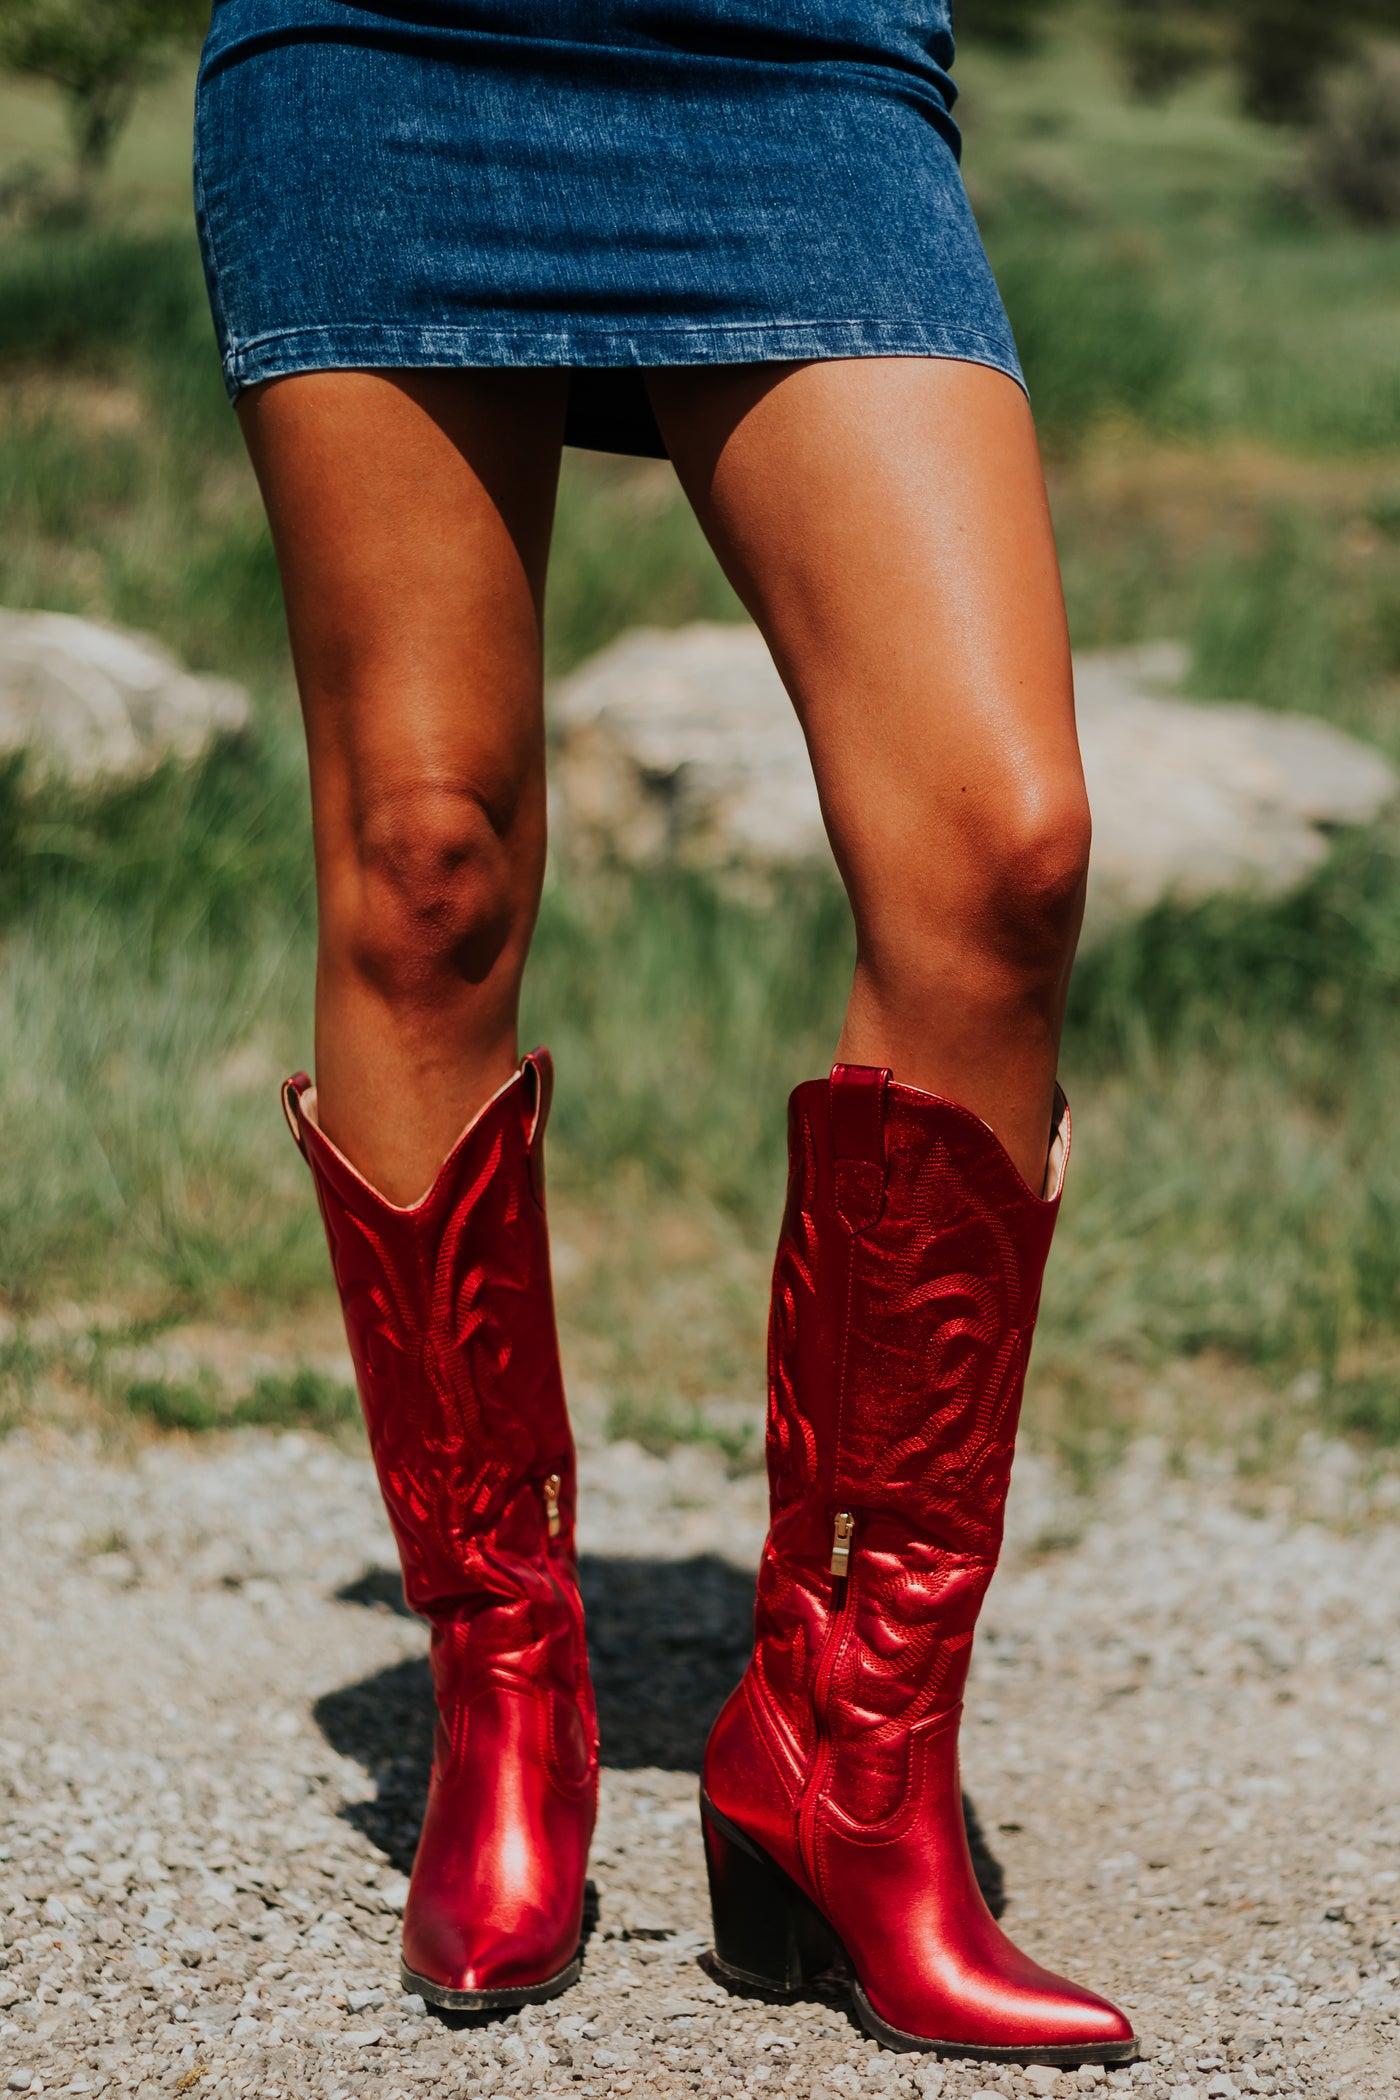 Candy Apple Red Faux Leather Metallic Western Boots